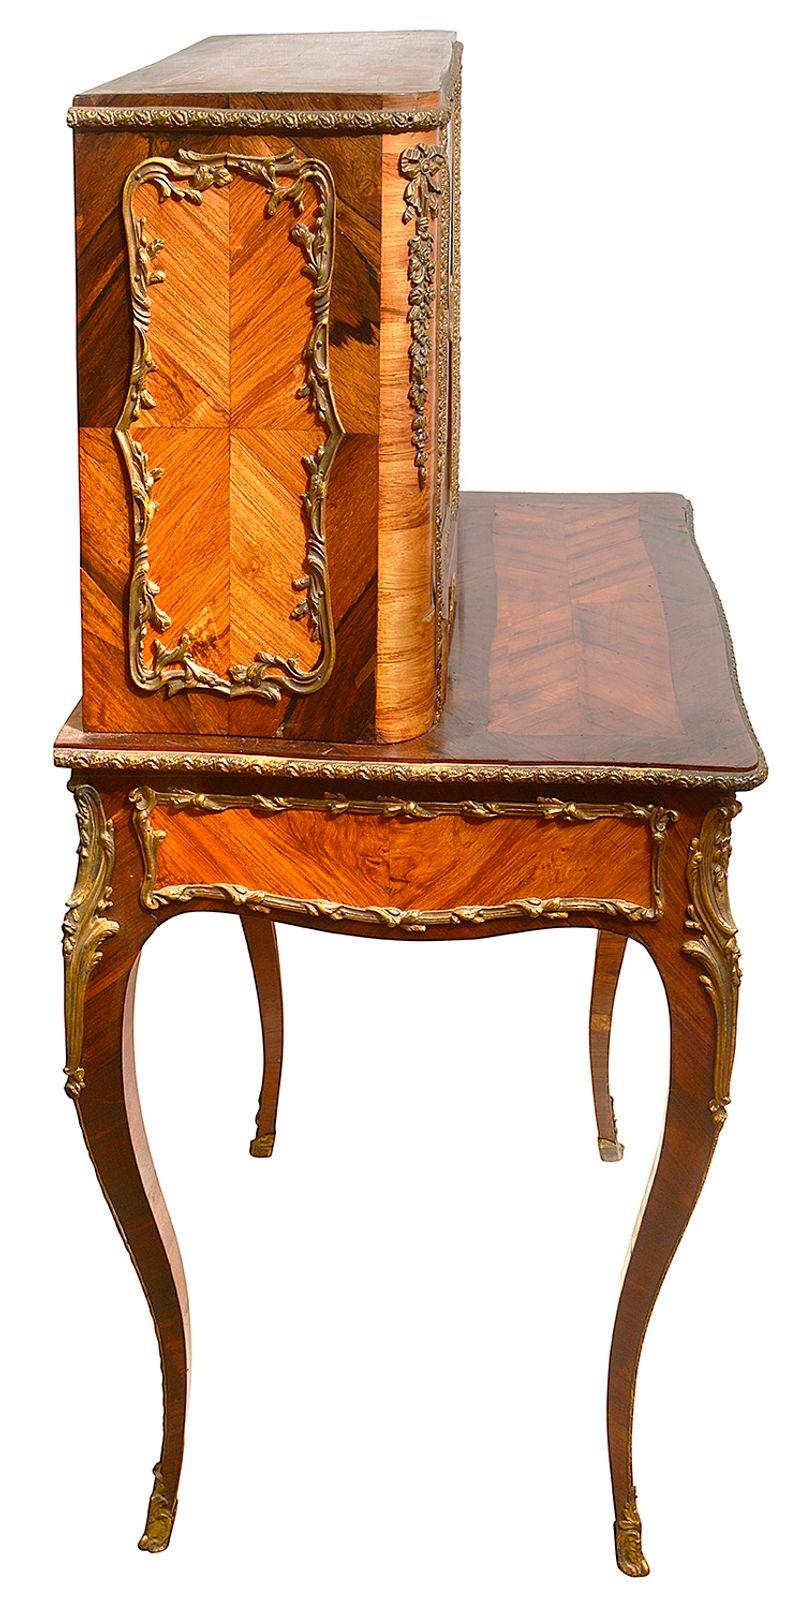 French Kingwood and Ormolu-Mounted Bonheur Du Jour, 19th Century For Sale 1